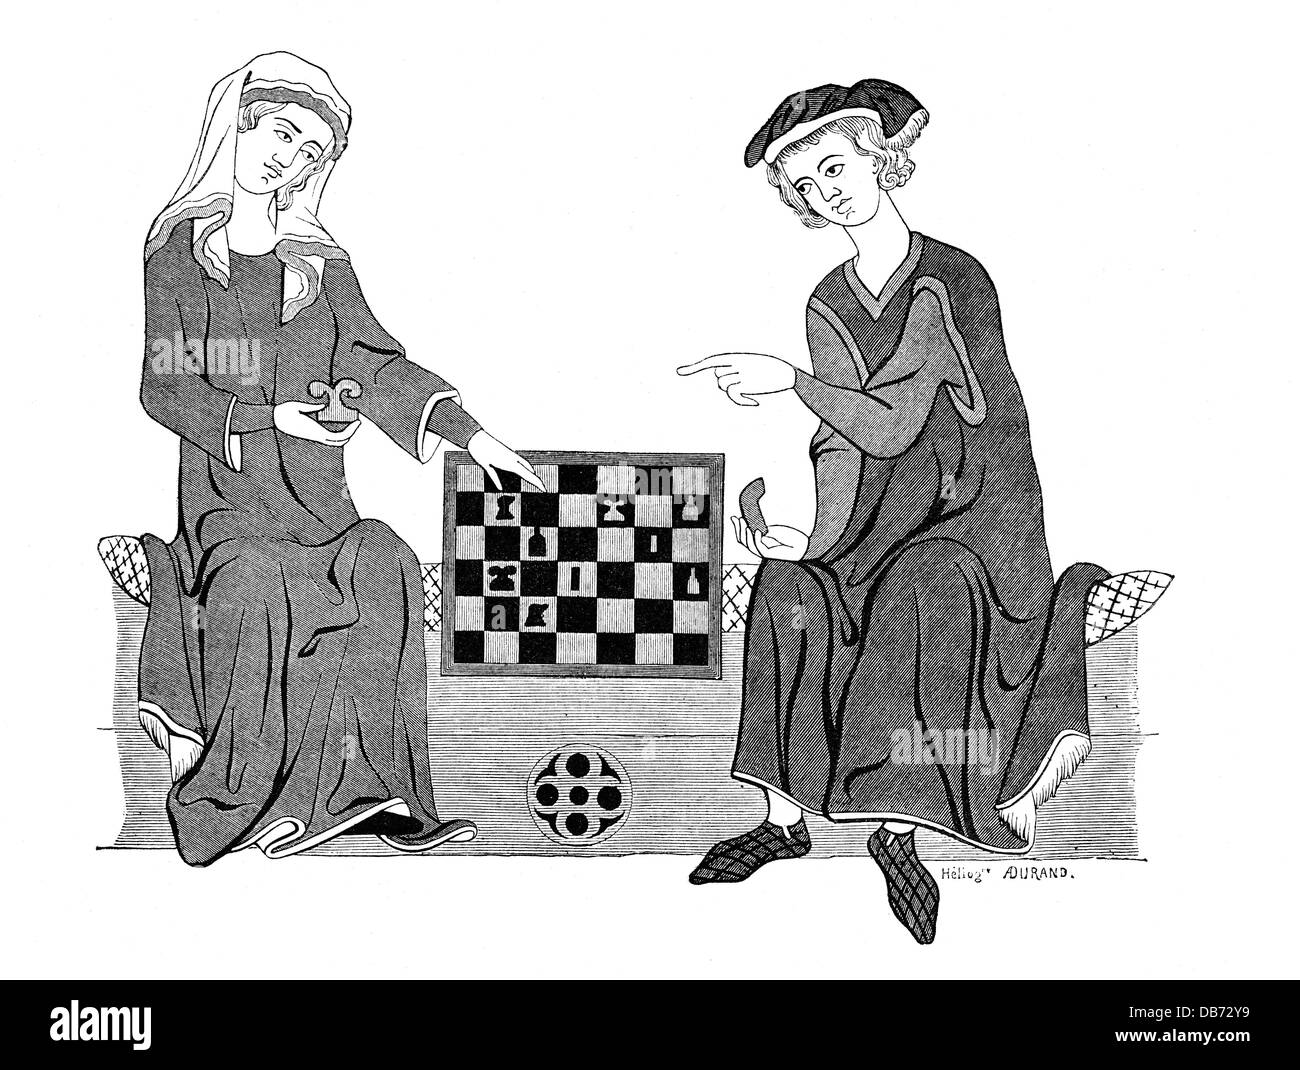 game, chess, woman and man playing game of chess, after a miniature, 13th century, photoengraving, by A. Durand, Imperial library, Paris, Middle Ages, full length, sitting, sit, clothes, playing, play, board, boards, chessboard, chequerboard, tokens, meeples, chess piece, chessman, chess pieces, chessmen, photoengraving, photogravure, historic, historical, medieval, woman, women, female, people, men, male, Additional-Rights-Clearences-Not Available Stock Photo